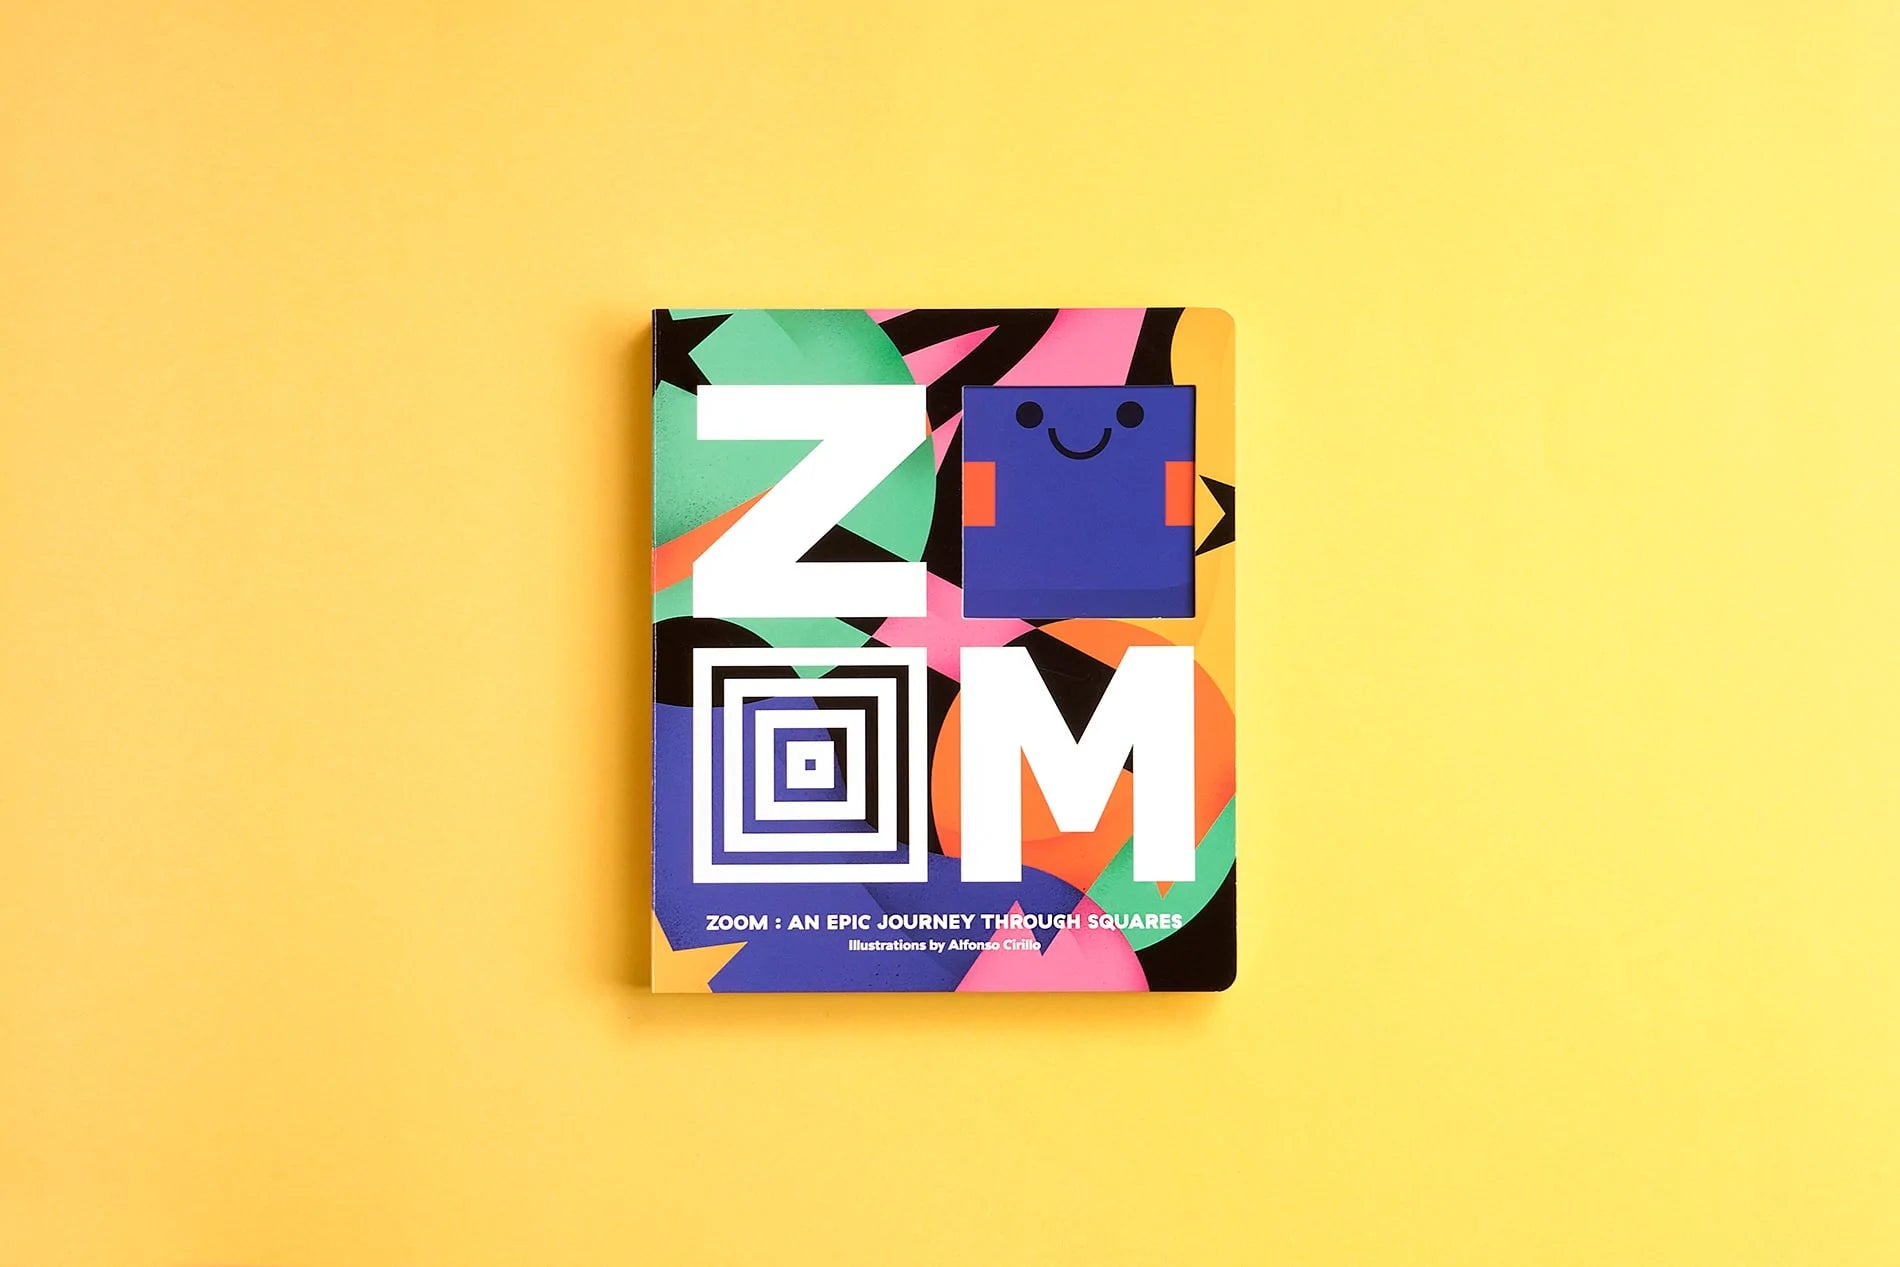 ZOOM: An Epic Journey Through Squares